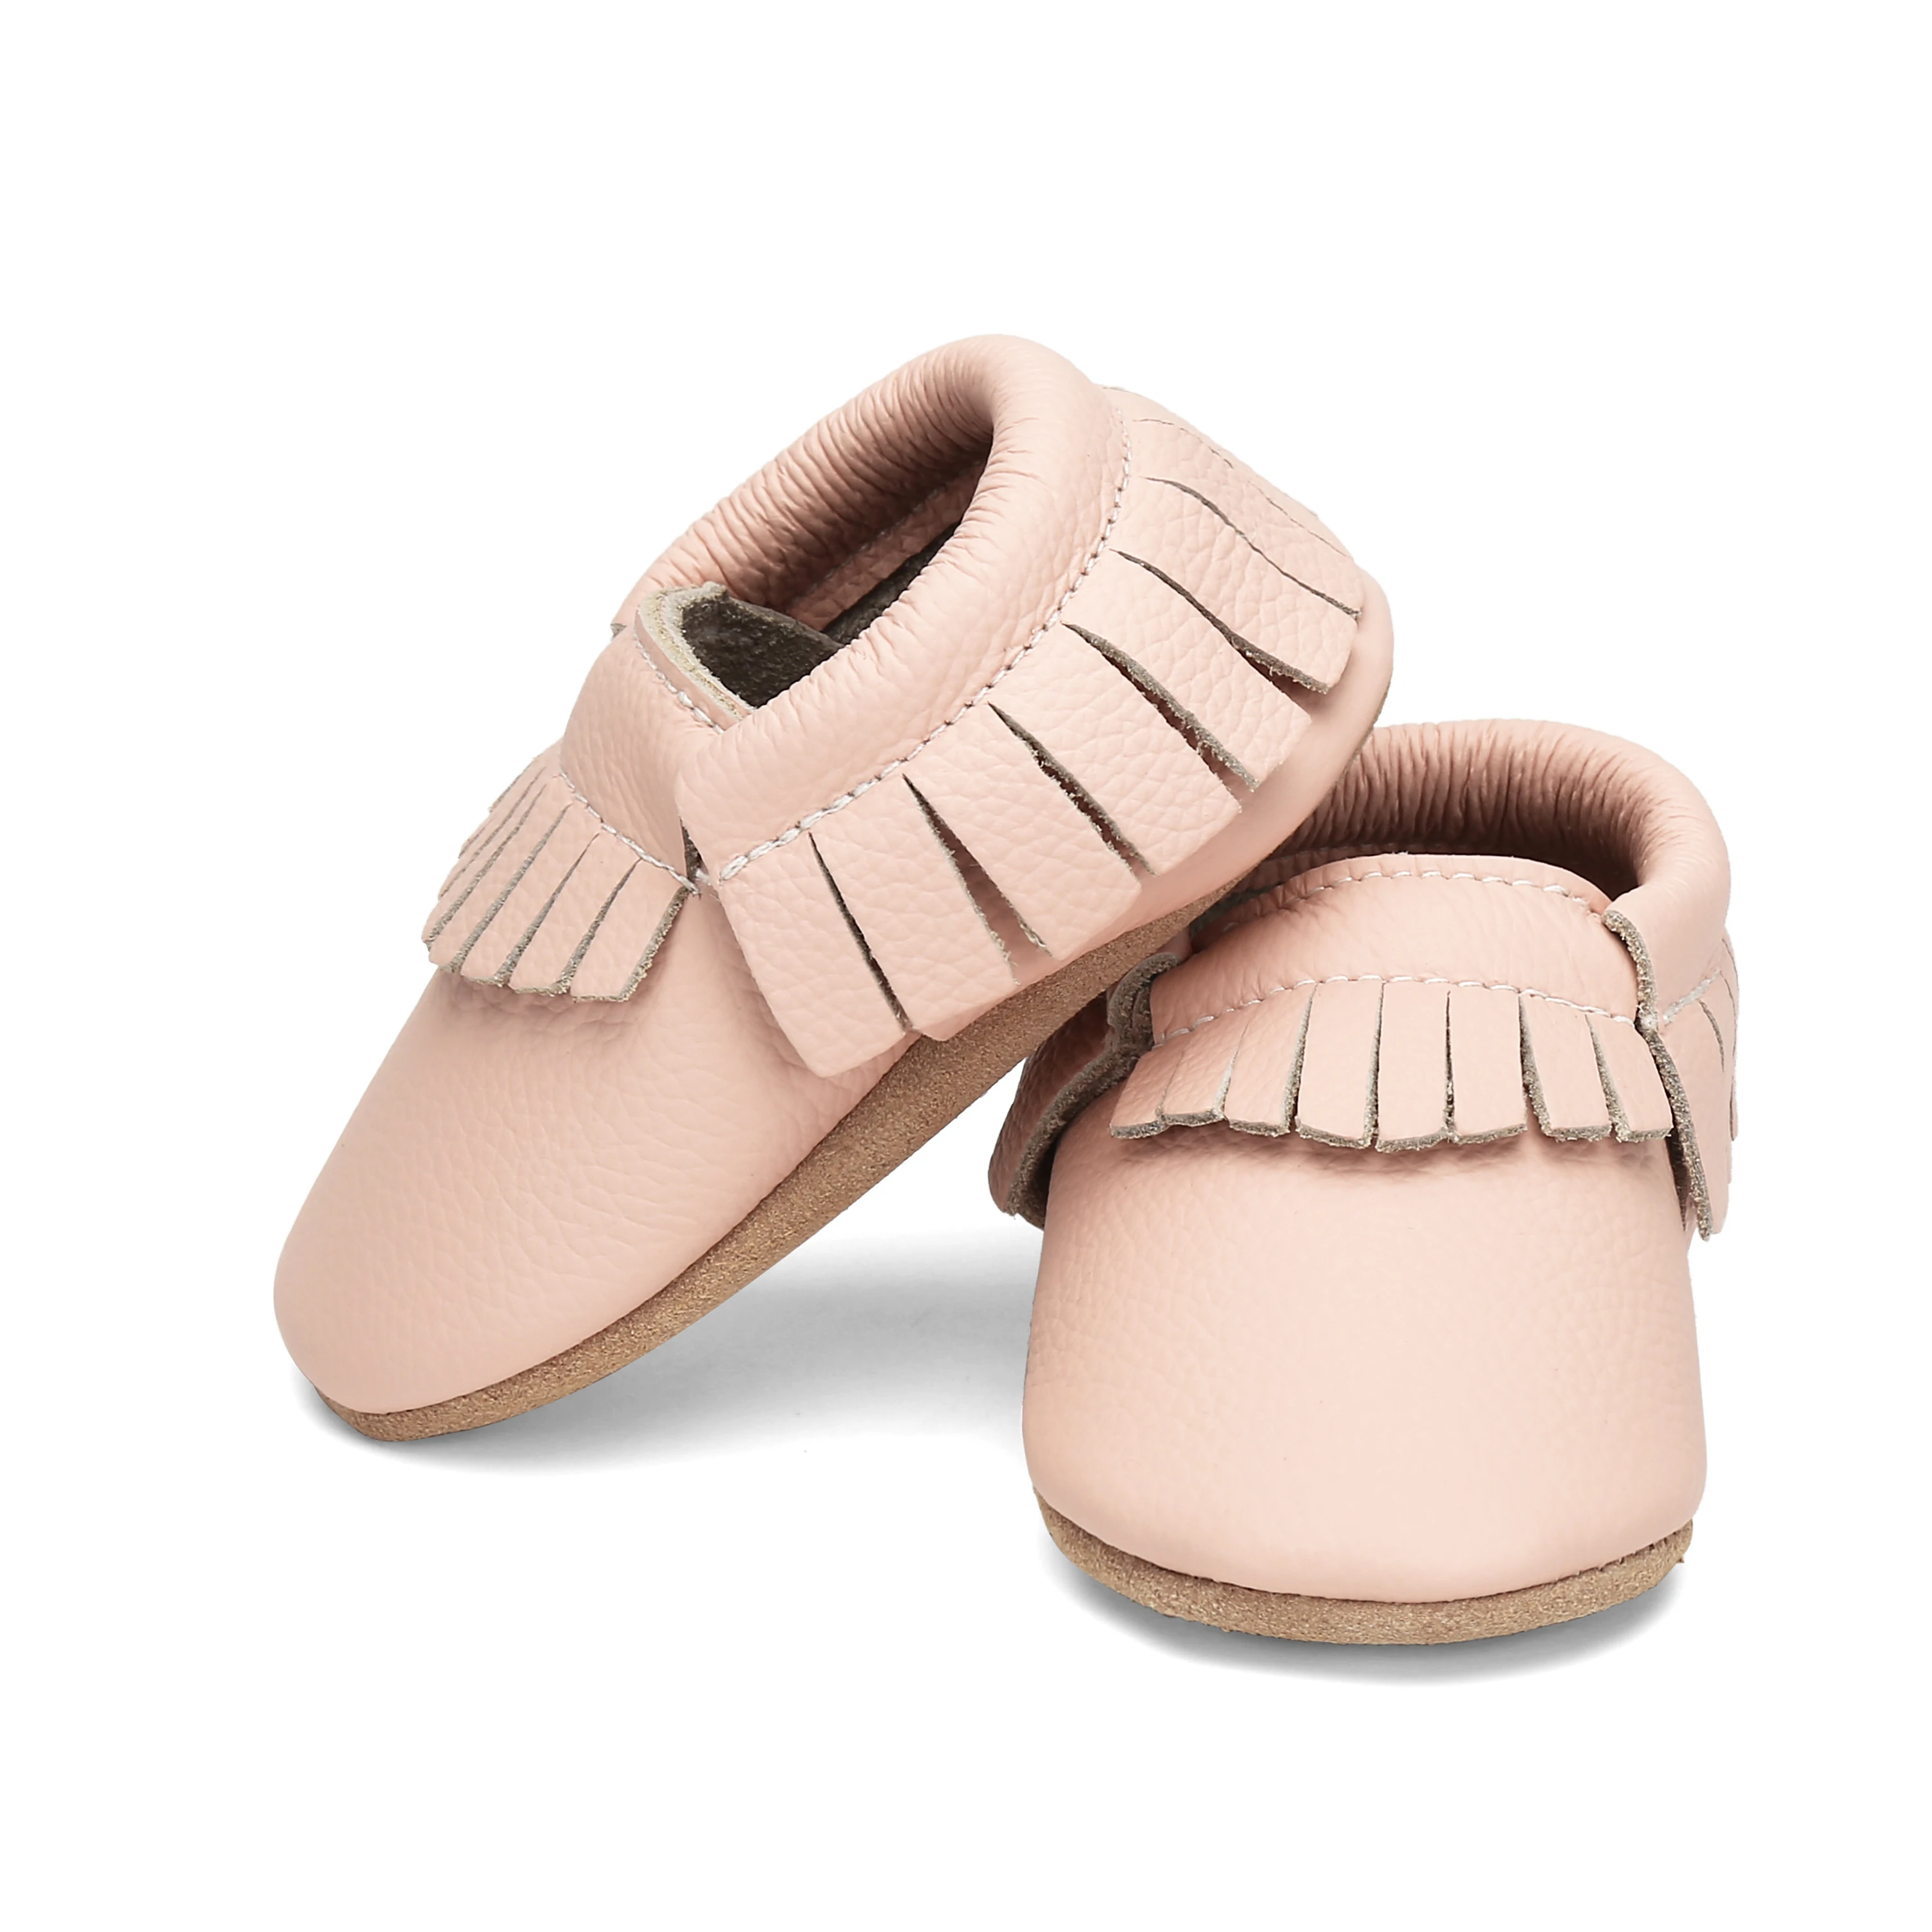 

0-24 Factory Price Soft Genuine Leather Pink Tassels Custom Casual Baby Shoes Toddler For Kids Boys Girls, 6 color